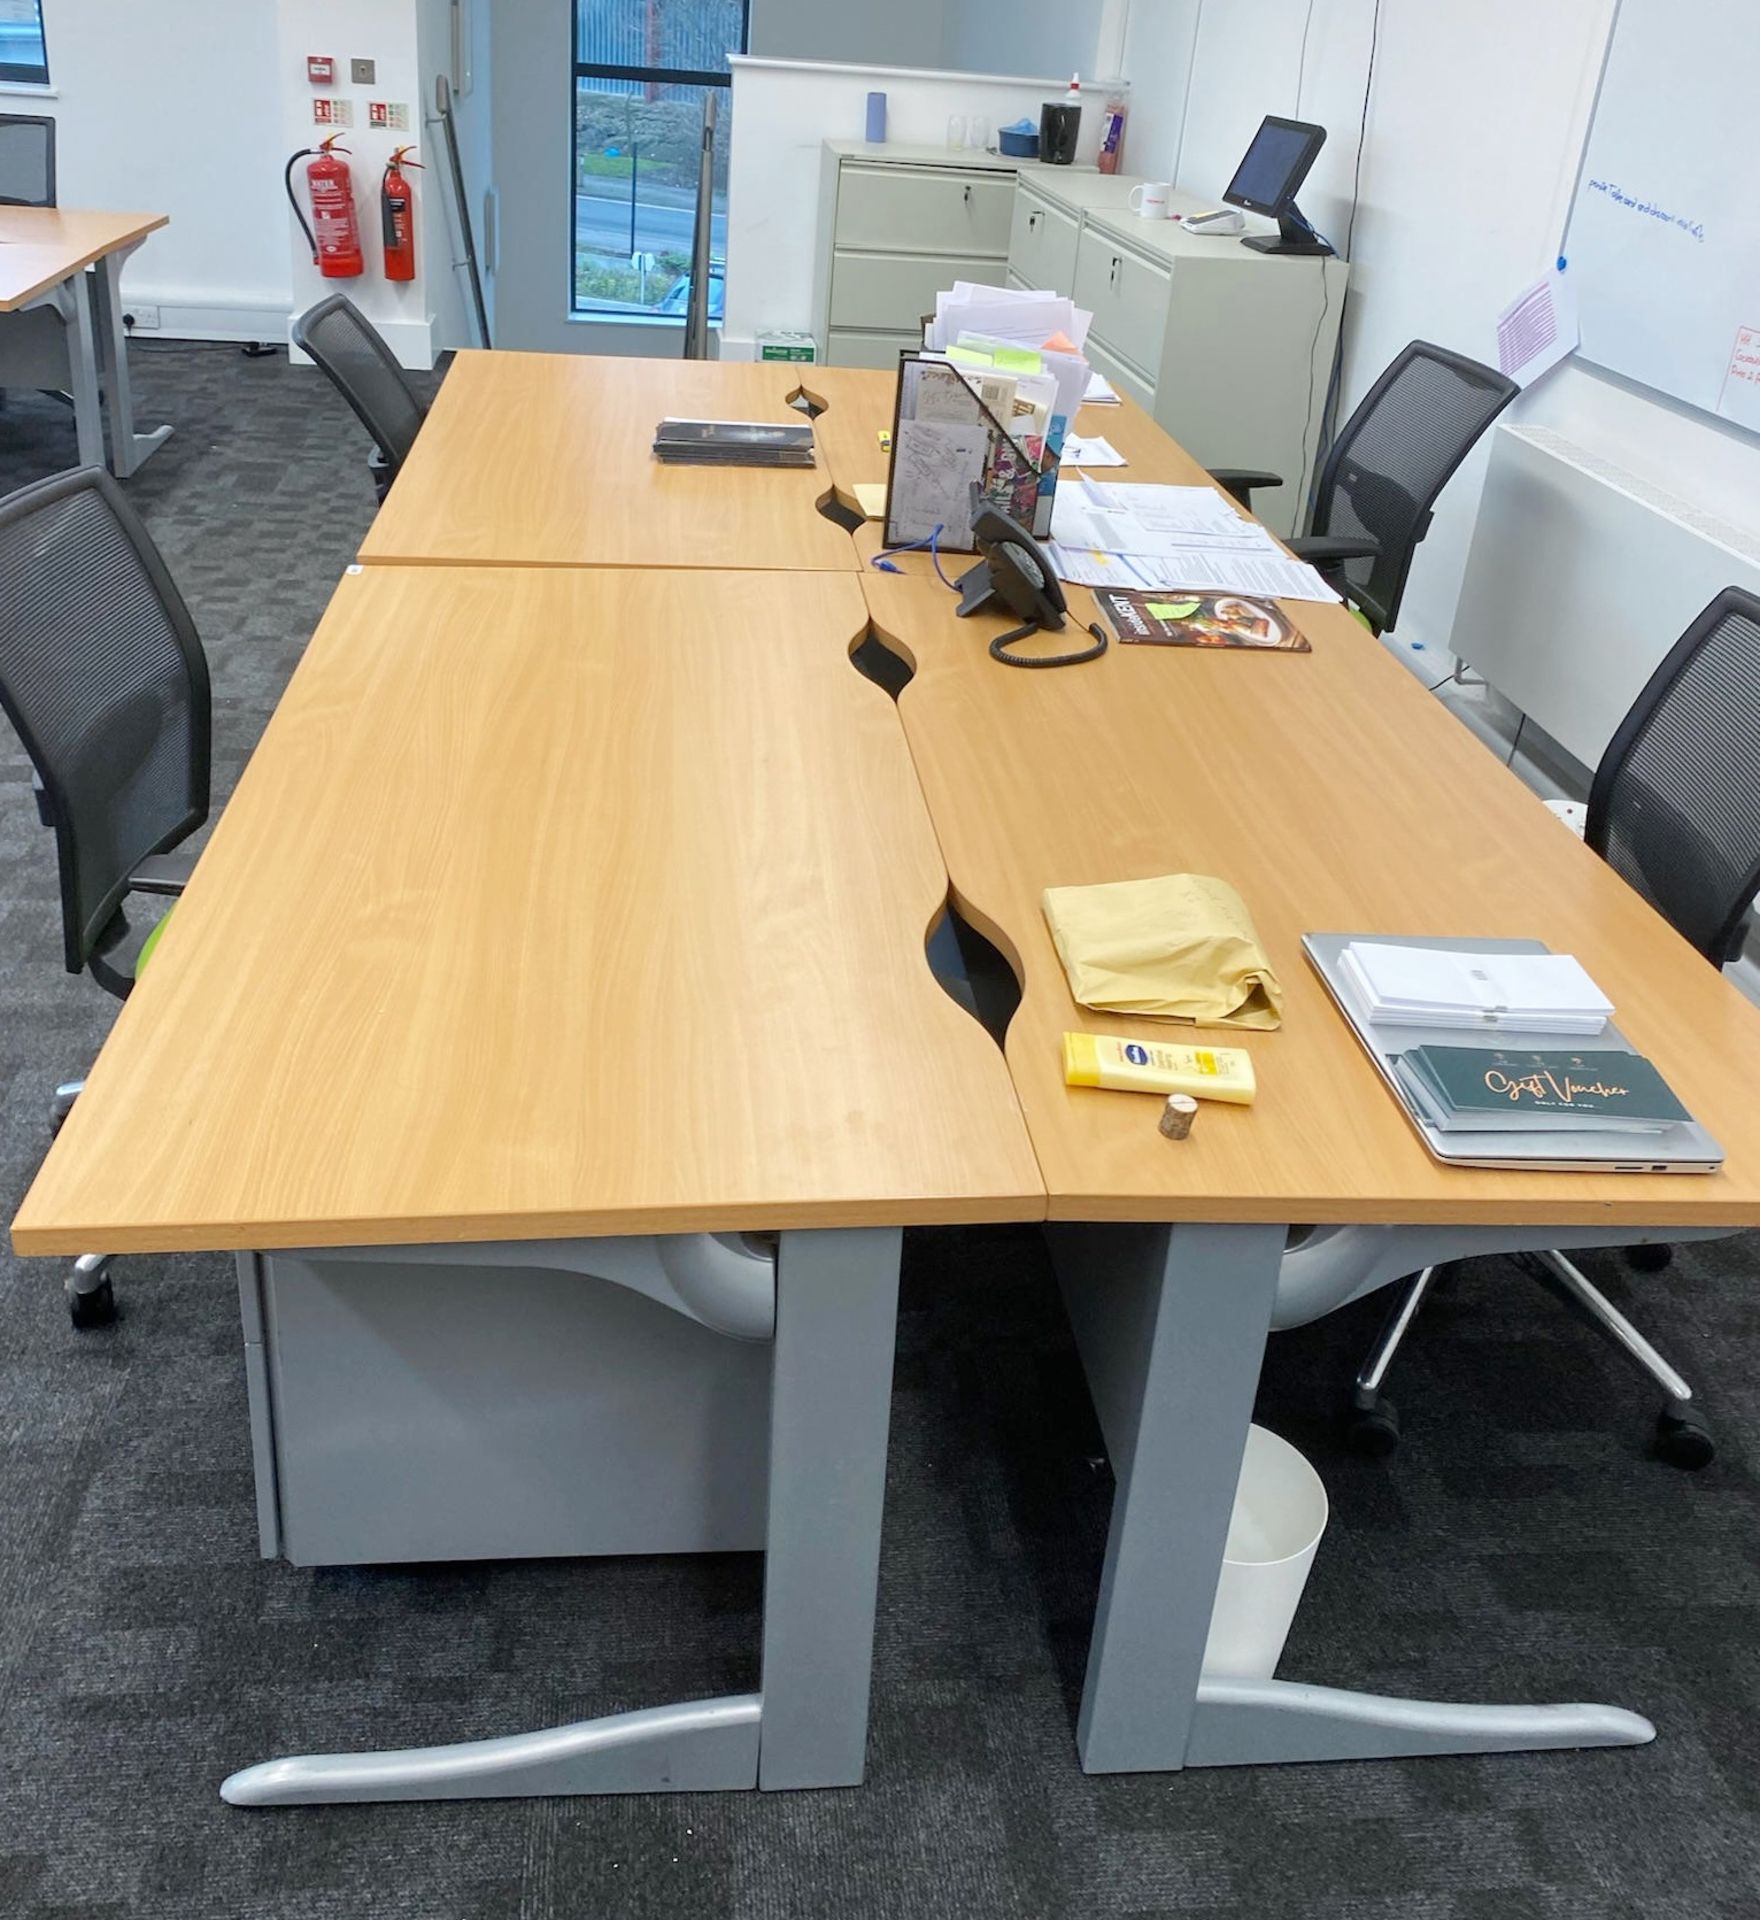 4 x Contemporary Beech Office Desks With Grey Pedestals and Green/Black Swivel Chairs - Image 2 of 4